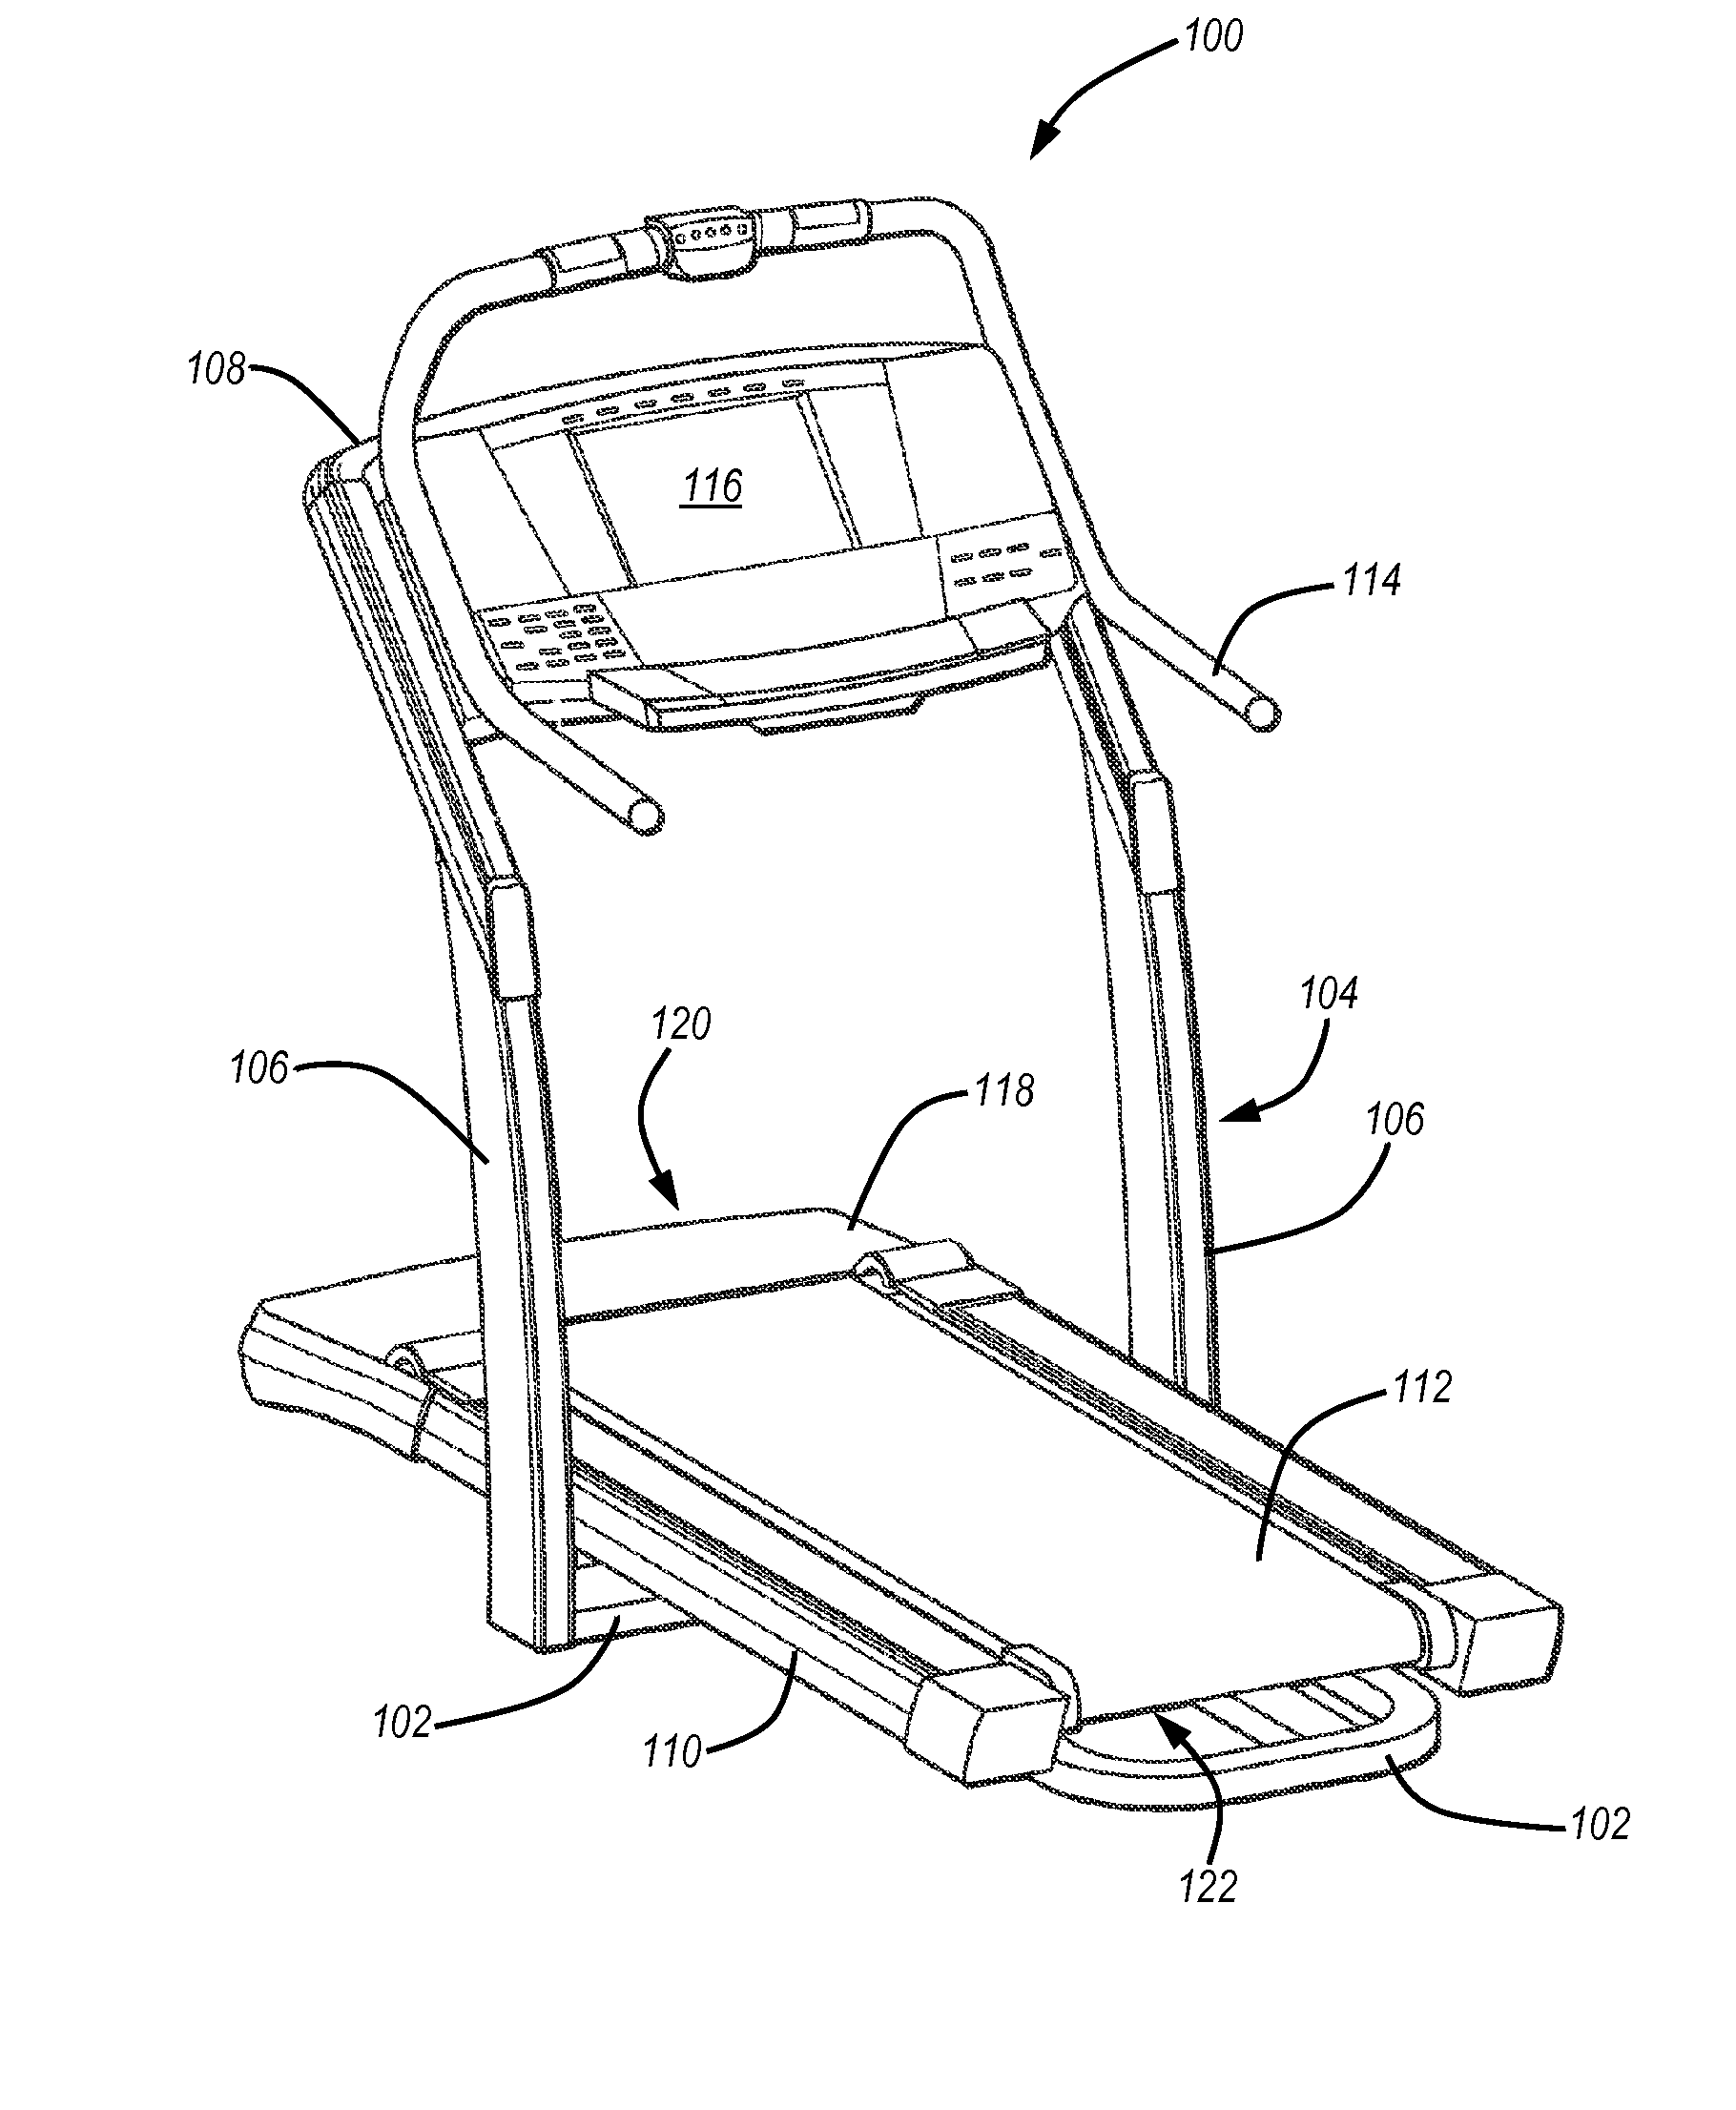 System and method for simulating environmental conditions on an exercise device